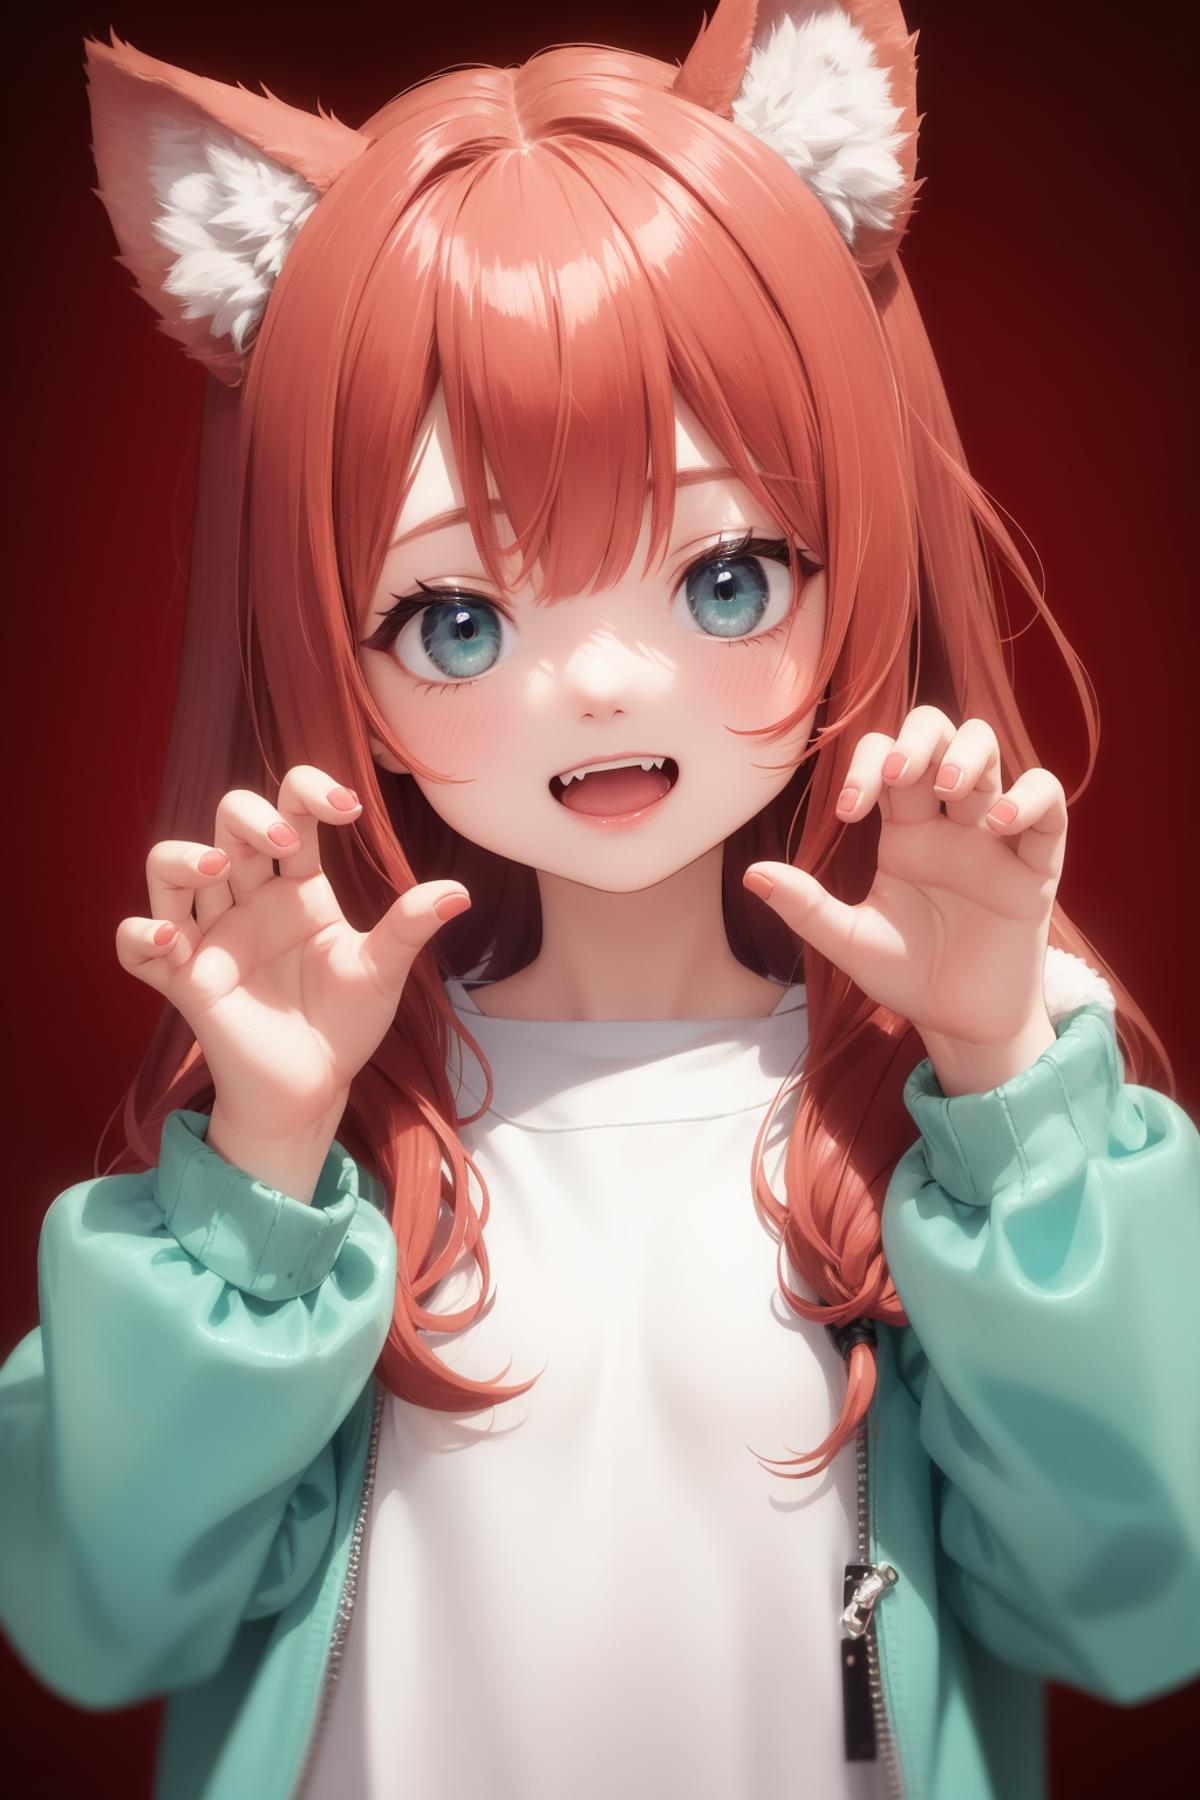 A CGI image of a girl with fangs and cat claws.